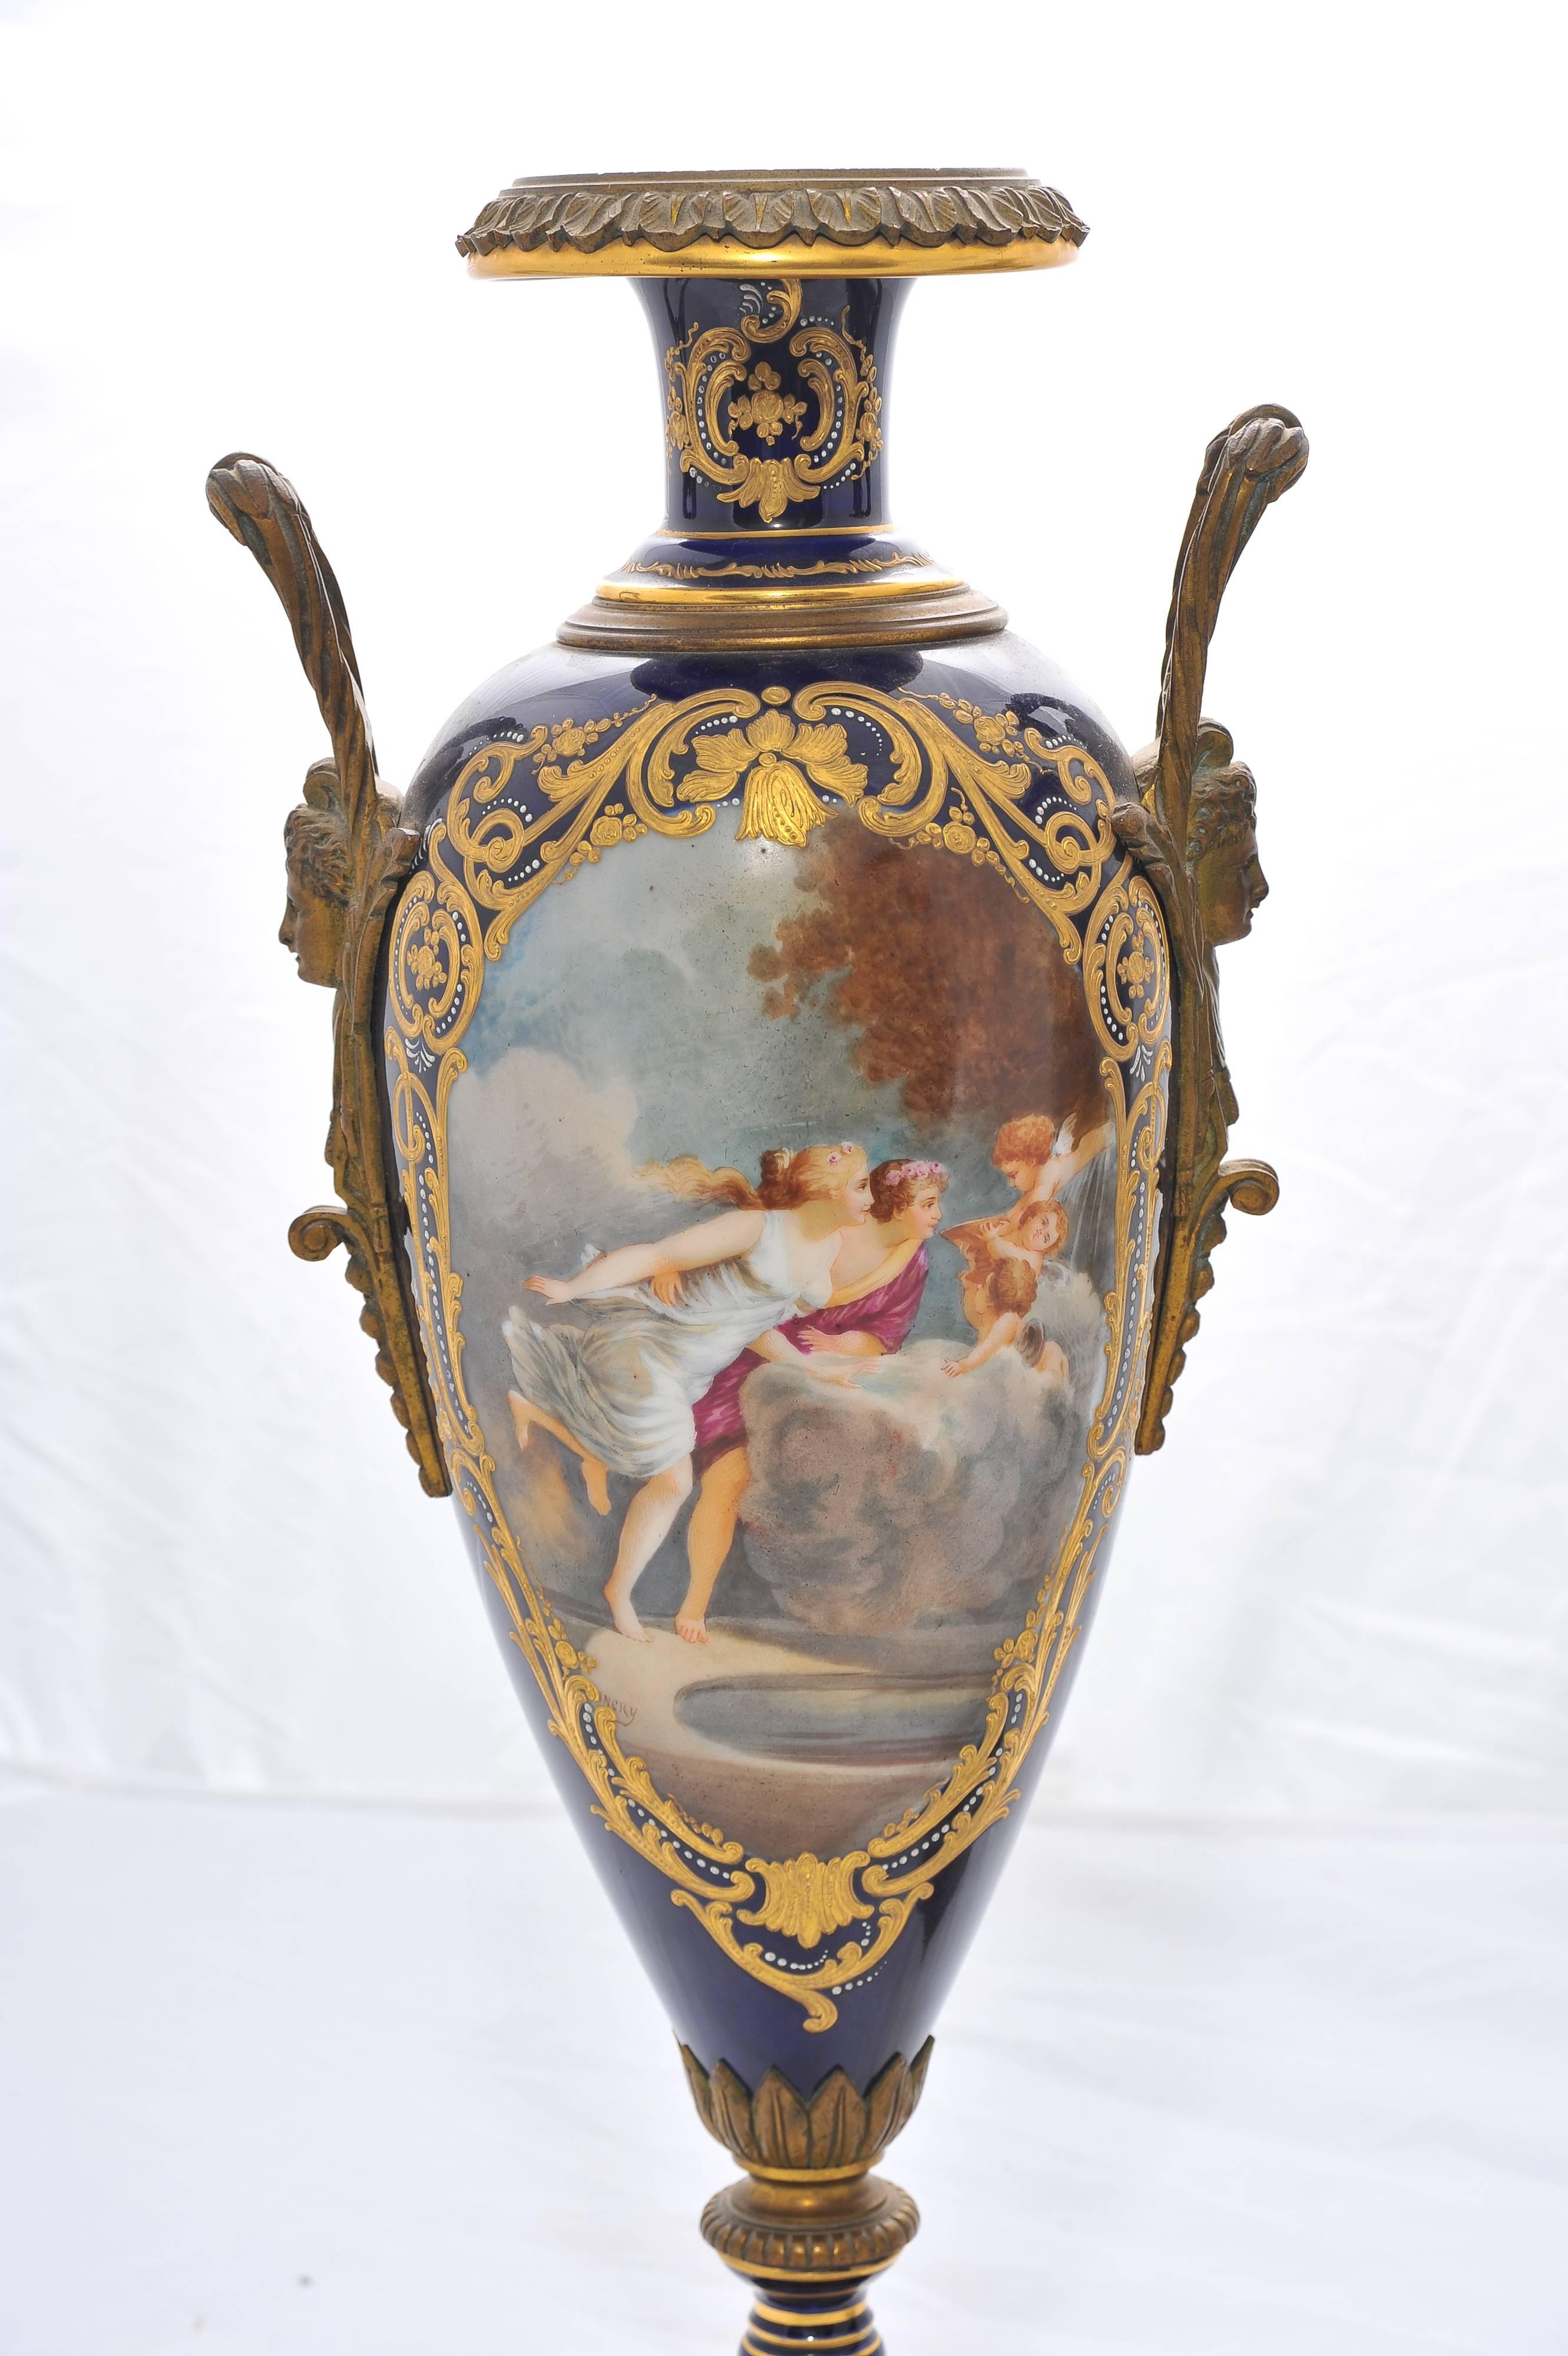 A good quality pair of 19th century 'Sevres' porcelain hand-painted classical vases, depicting romantic scenes to the panels, set in a dark blue background with gilded decoration and raised on ormolu bases.